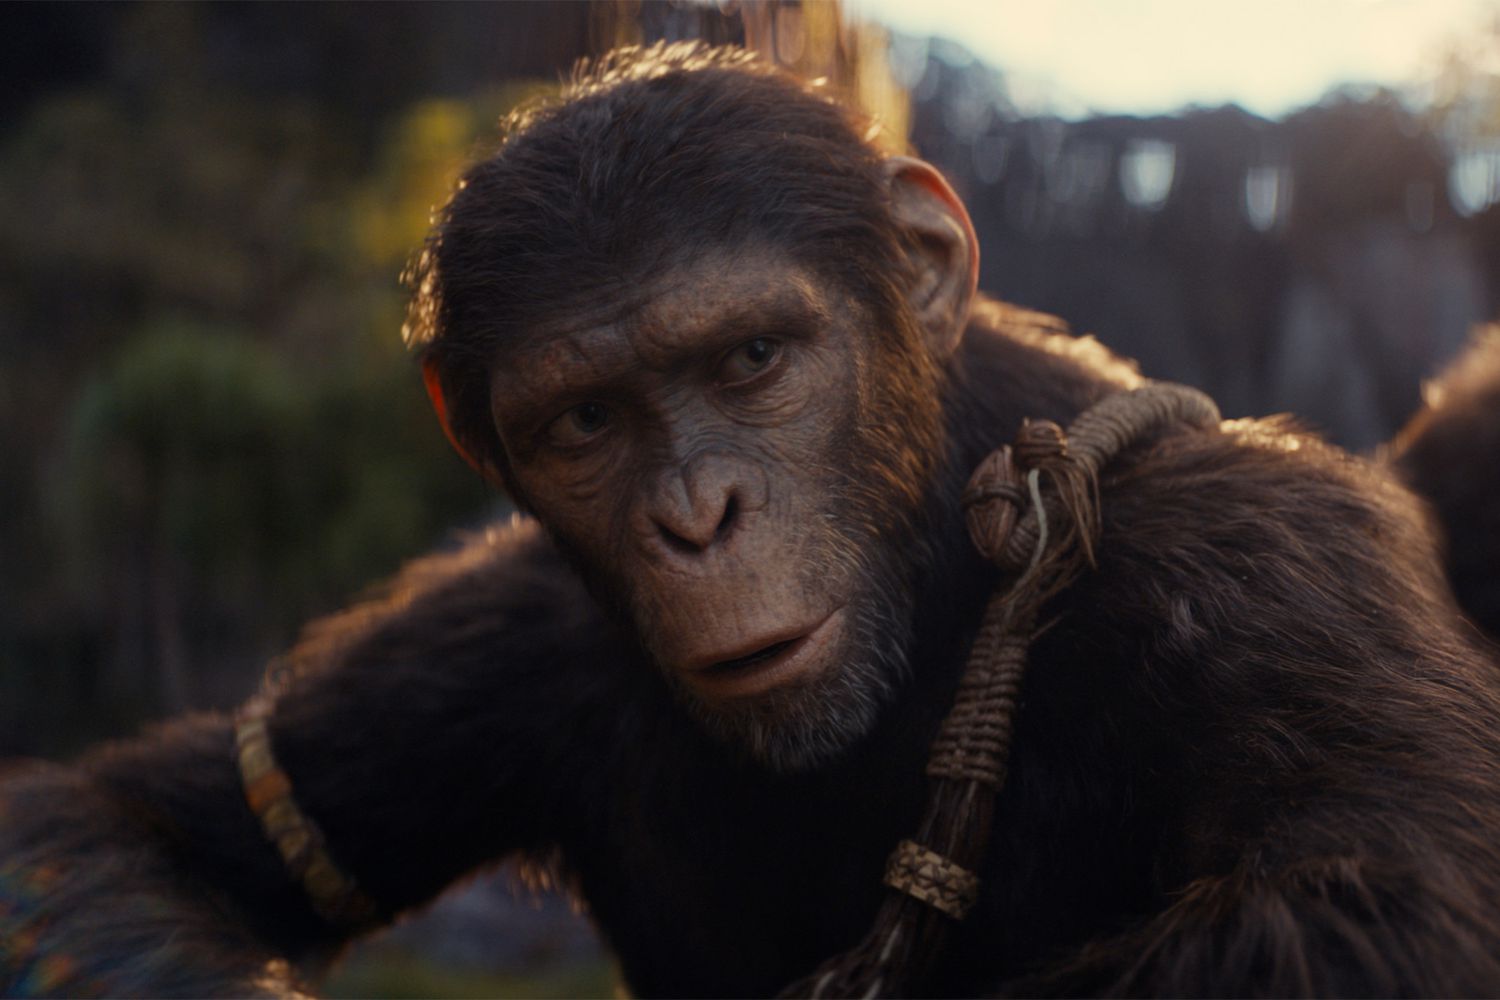 Kingdom of the Planet of the Apes Bridges Past and Future with Stunning Visuals